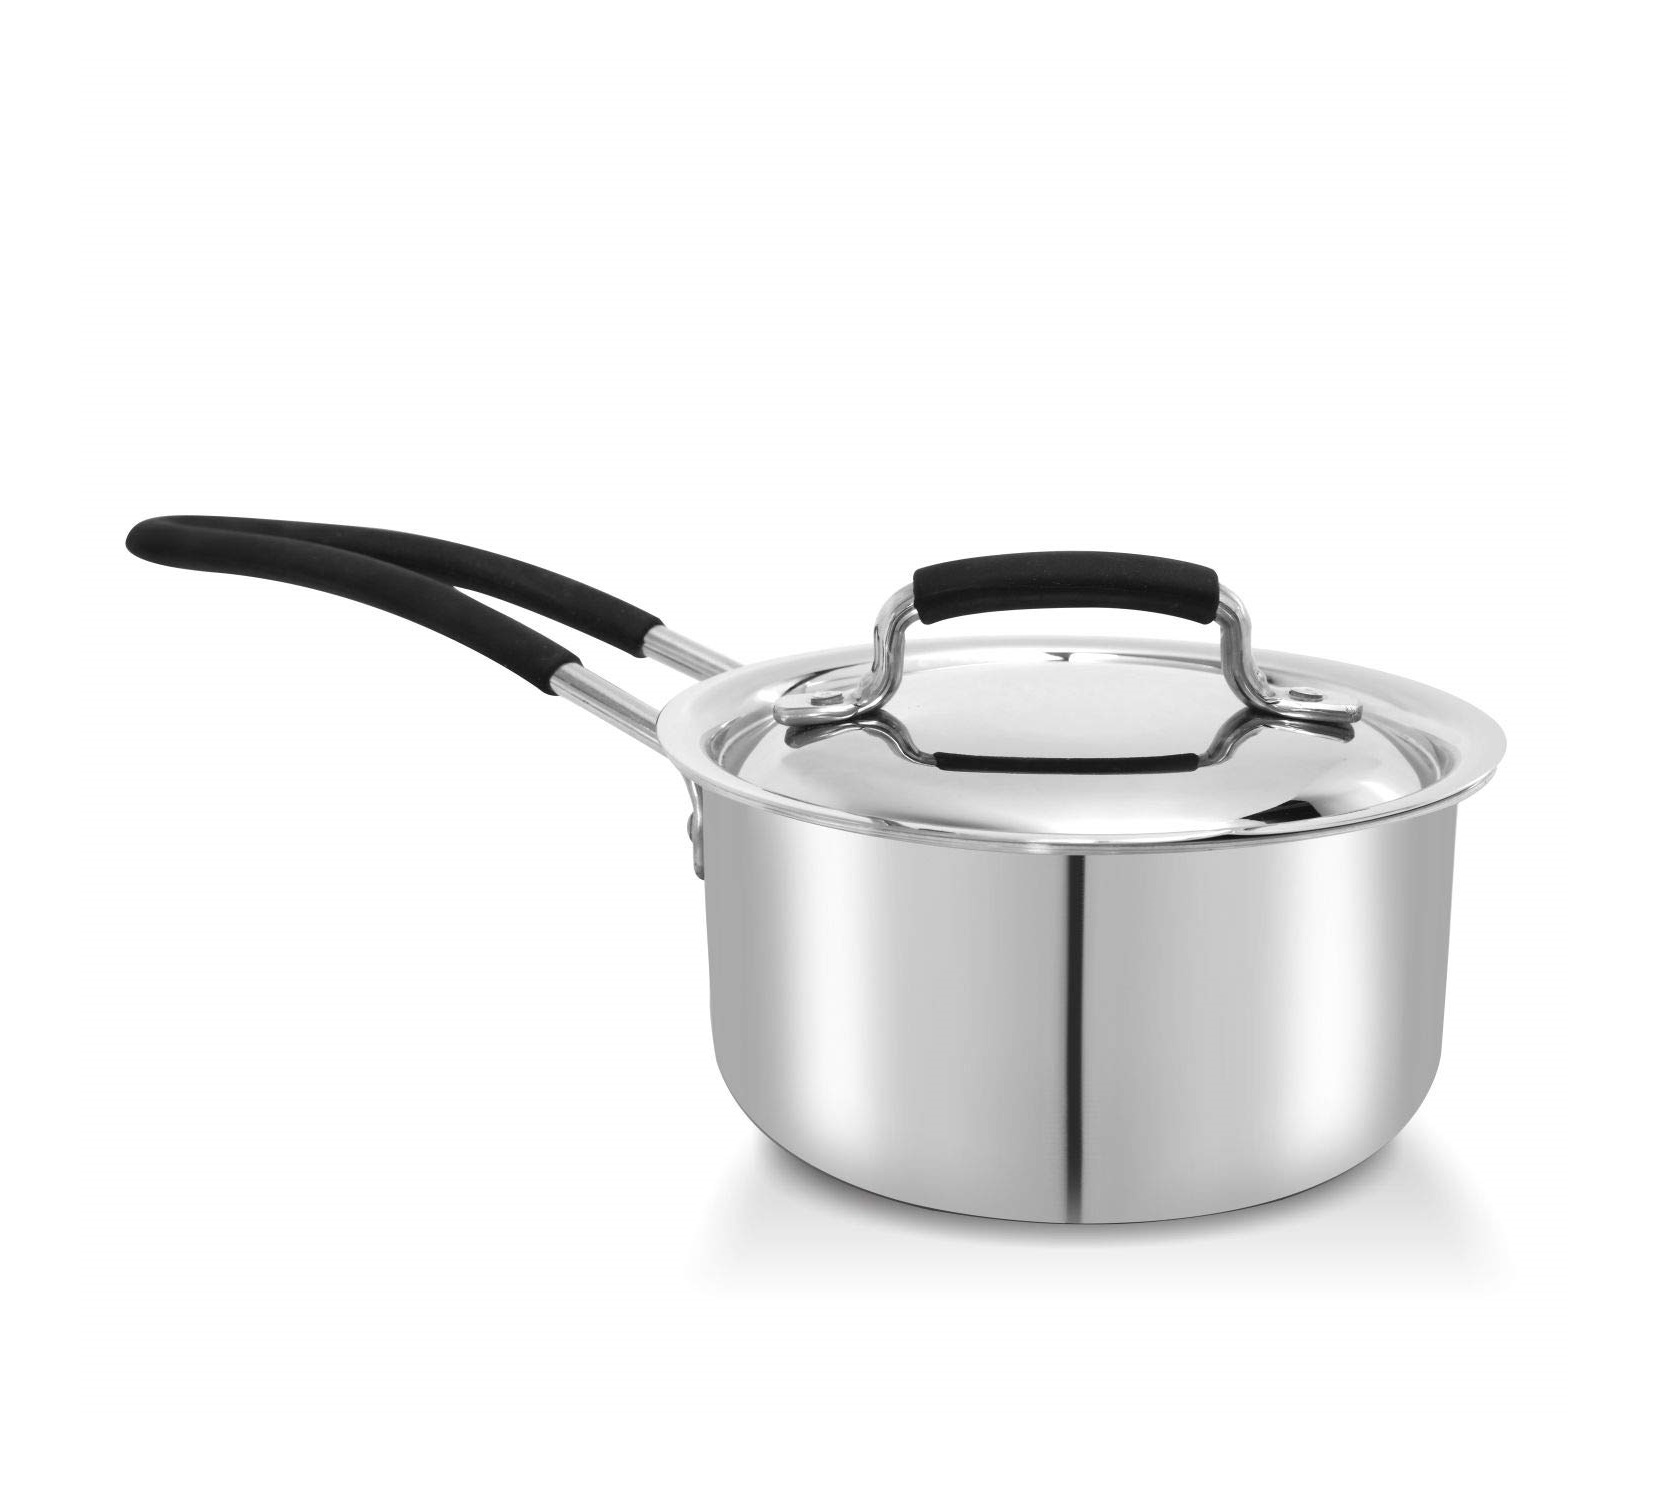 Warmeo Stainless Steel Tri Ply Sauce Pan (Induction 2 Lt)